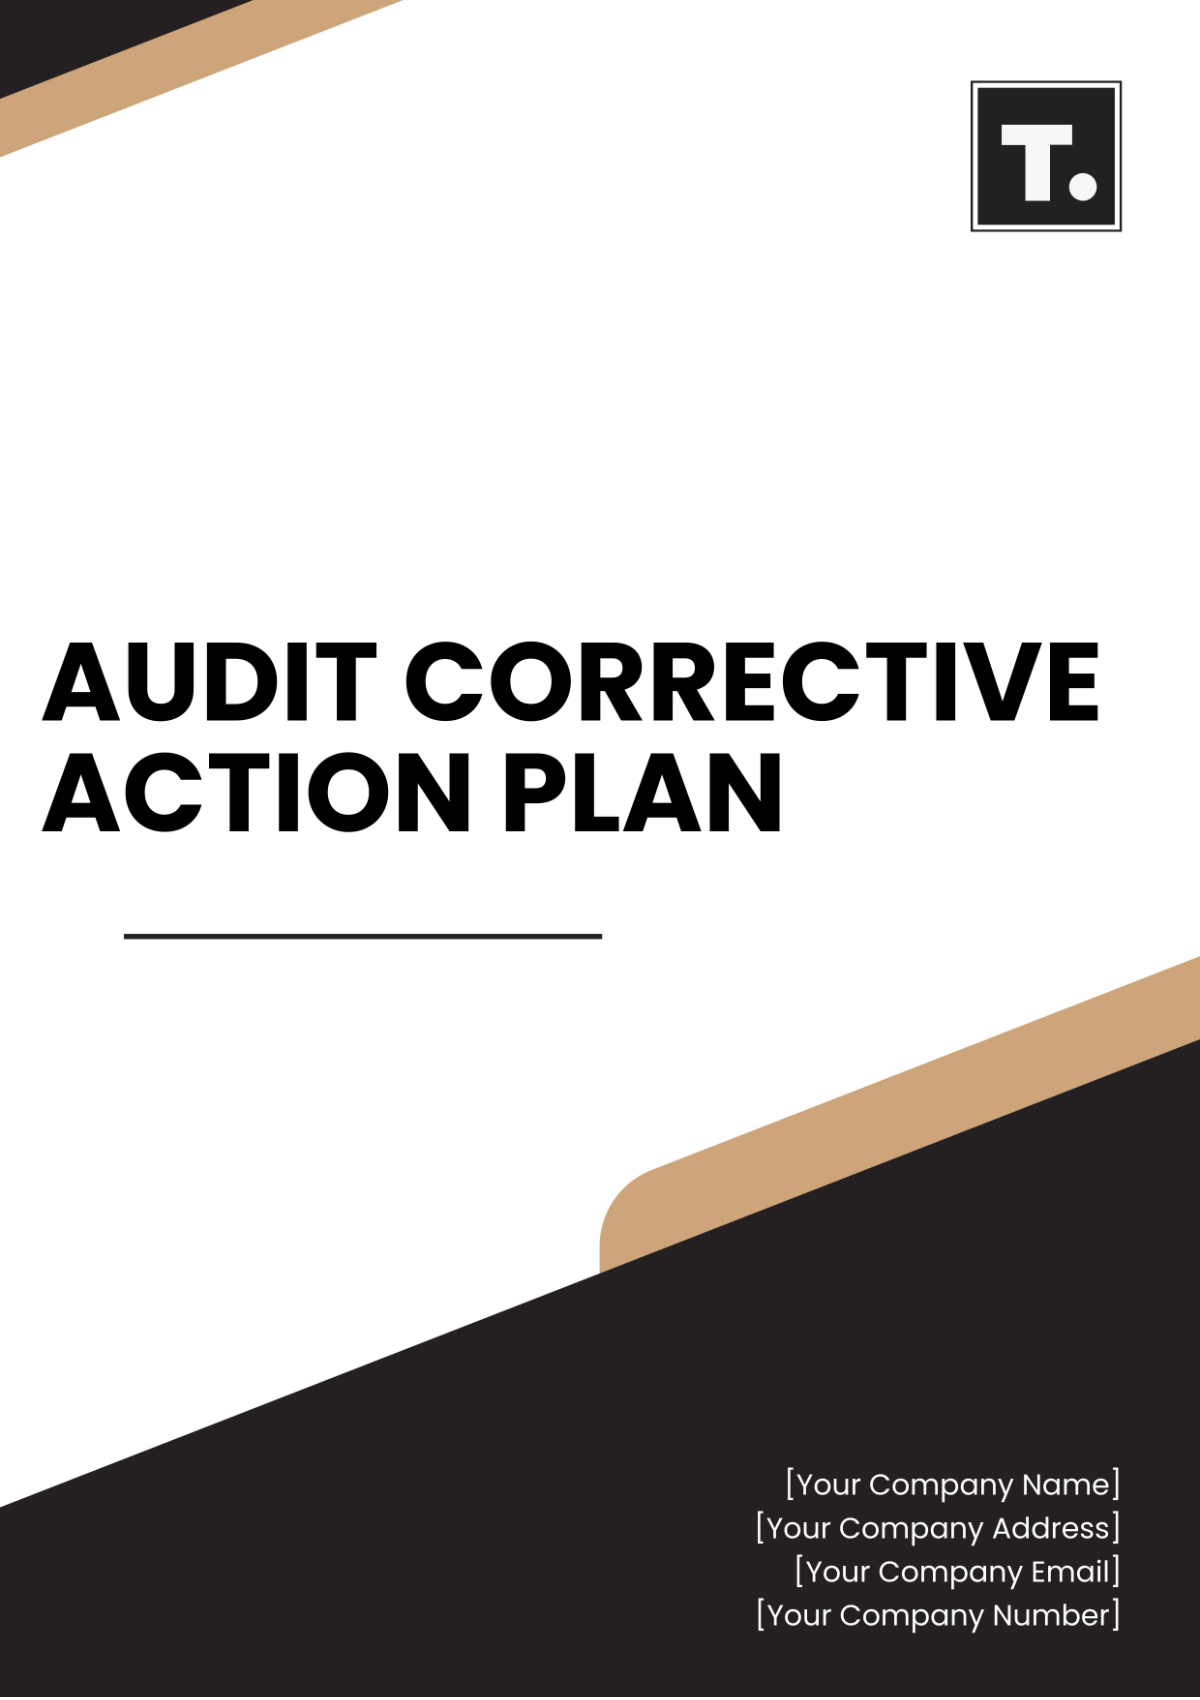 Free Audit Corrective Action Plan Template